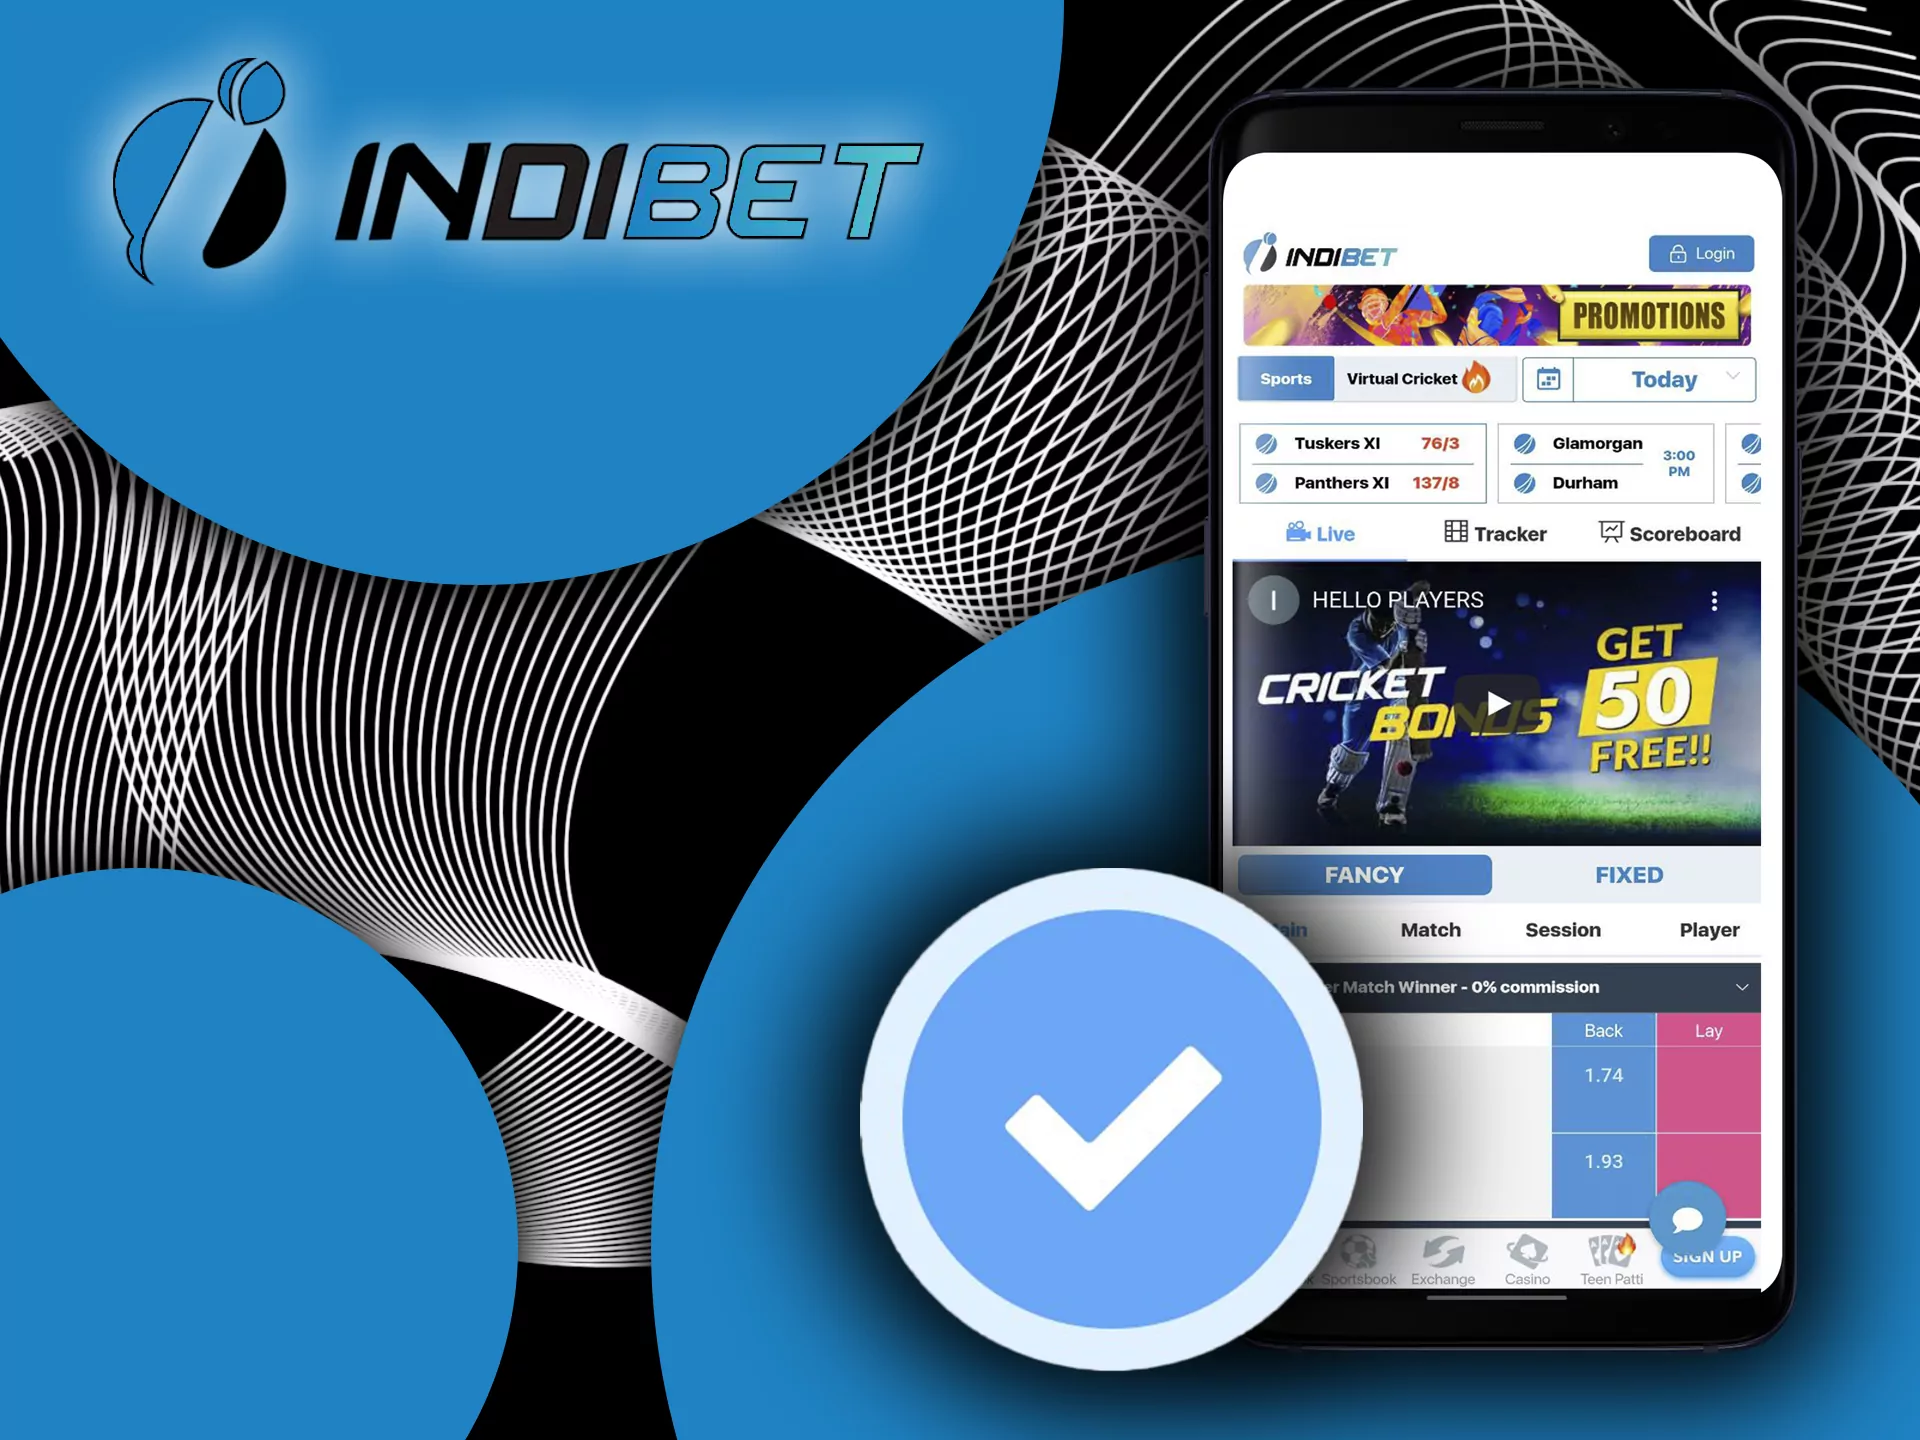 Indibet app is much more comfortable and funny to place bets in.